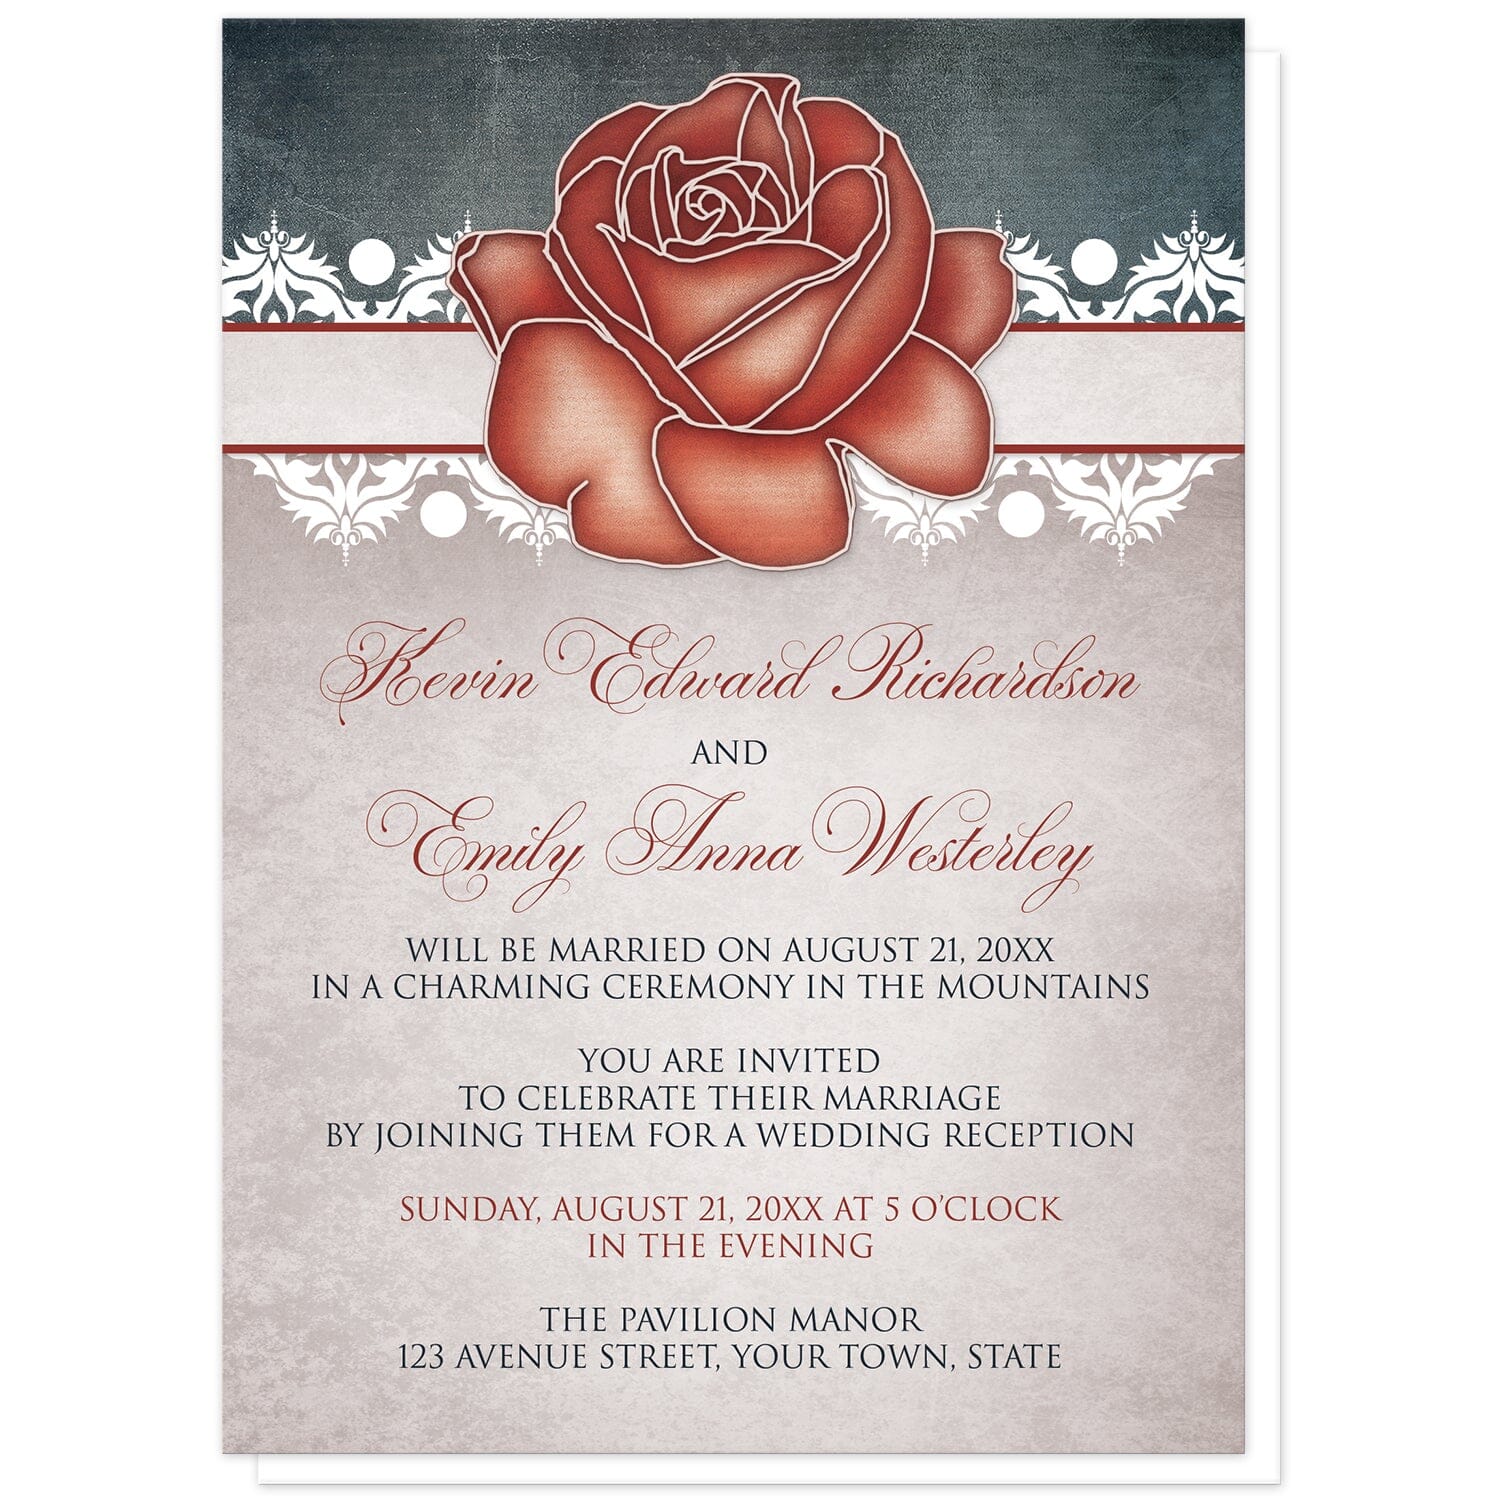 Rustic Country Rose Blue Reception Only Invitations at Artistically Invited. Rustic country rose blue reception only invitations designed with an eclectic mix of rustic, vintage, and modern elements. They feature an artistic red rose at the top over a stripe lined with white damask elements with a dark navy blue design at the top. Your personalized post-wedding reception details are custom printed in red and navy blue over a beige vintage parchment illustration below the rose.